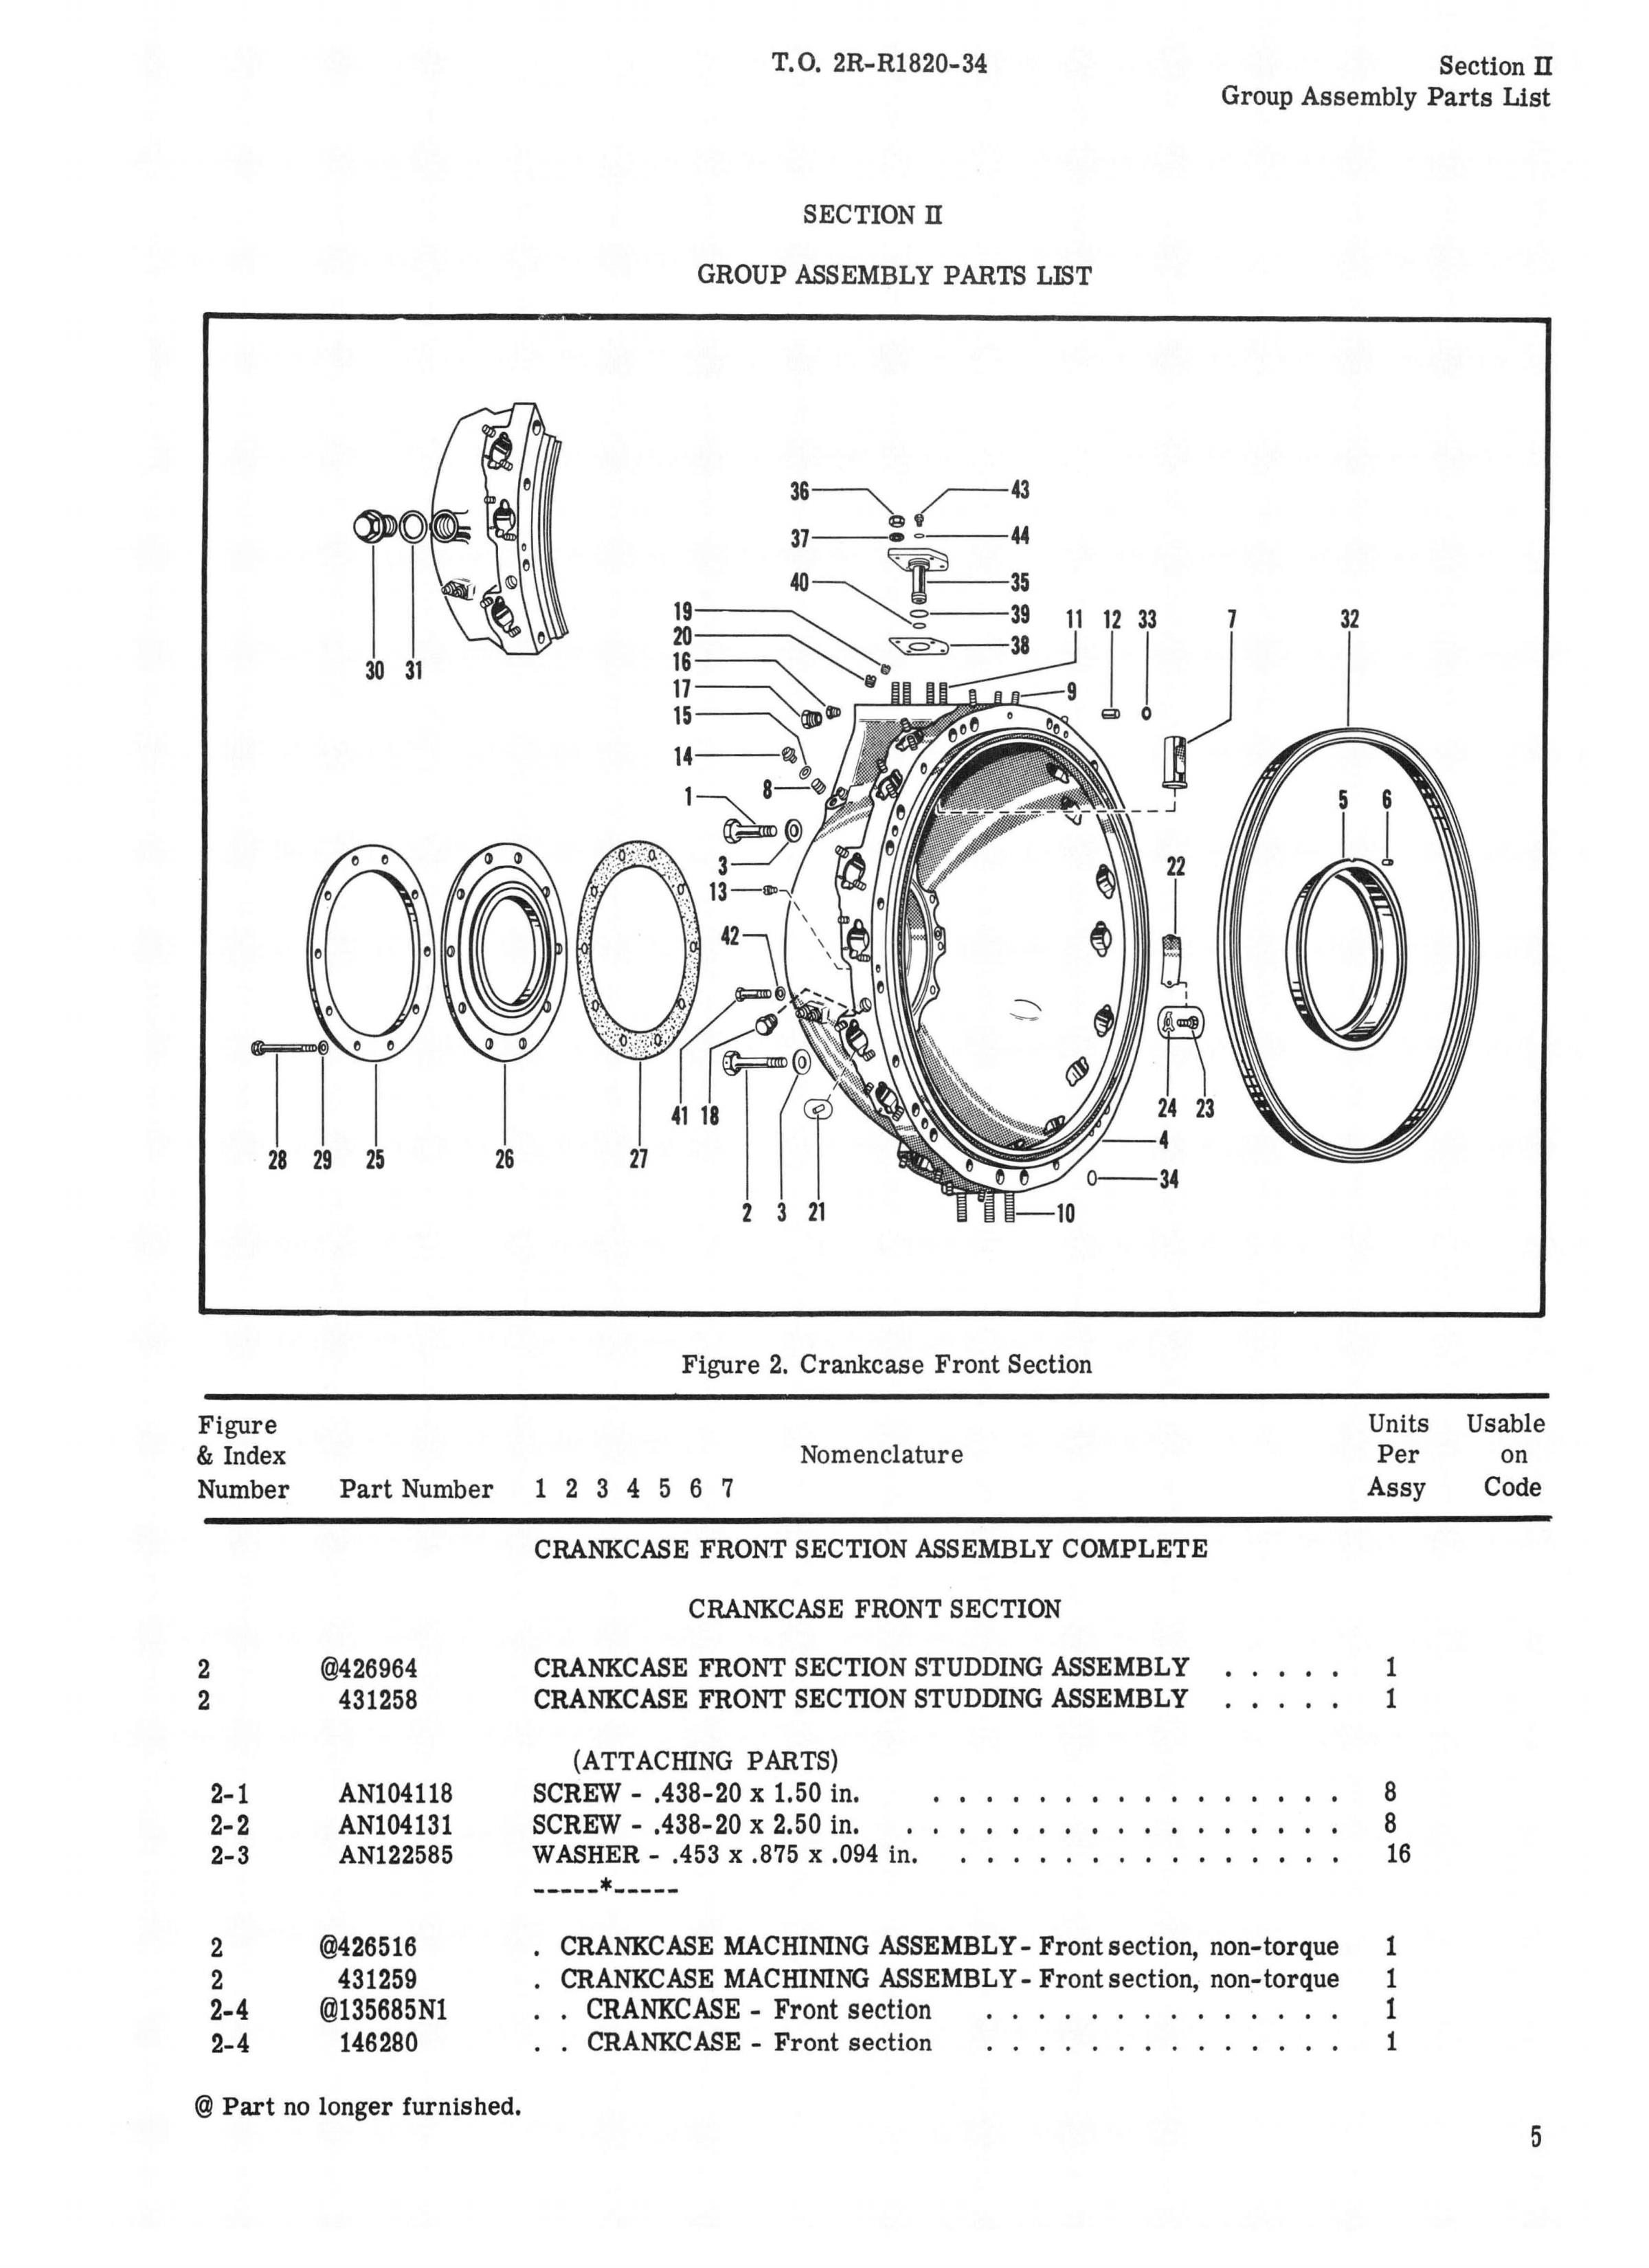 Sample page 9 from AirCorps Library document: Illustrated Parts Breakdown for Model R-1820-103 Engine